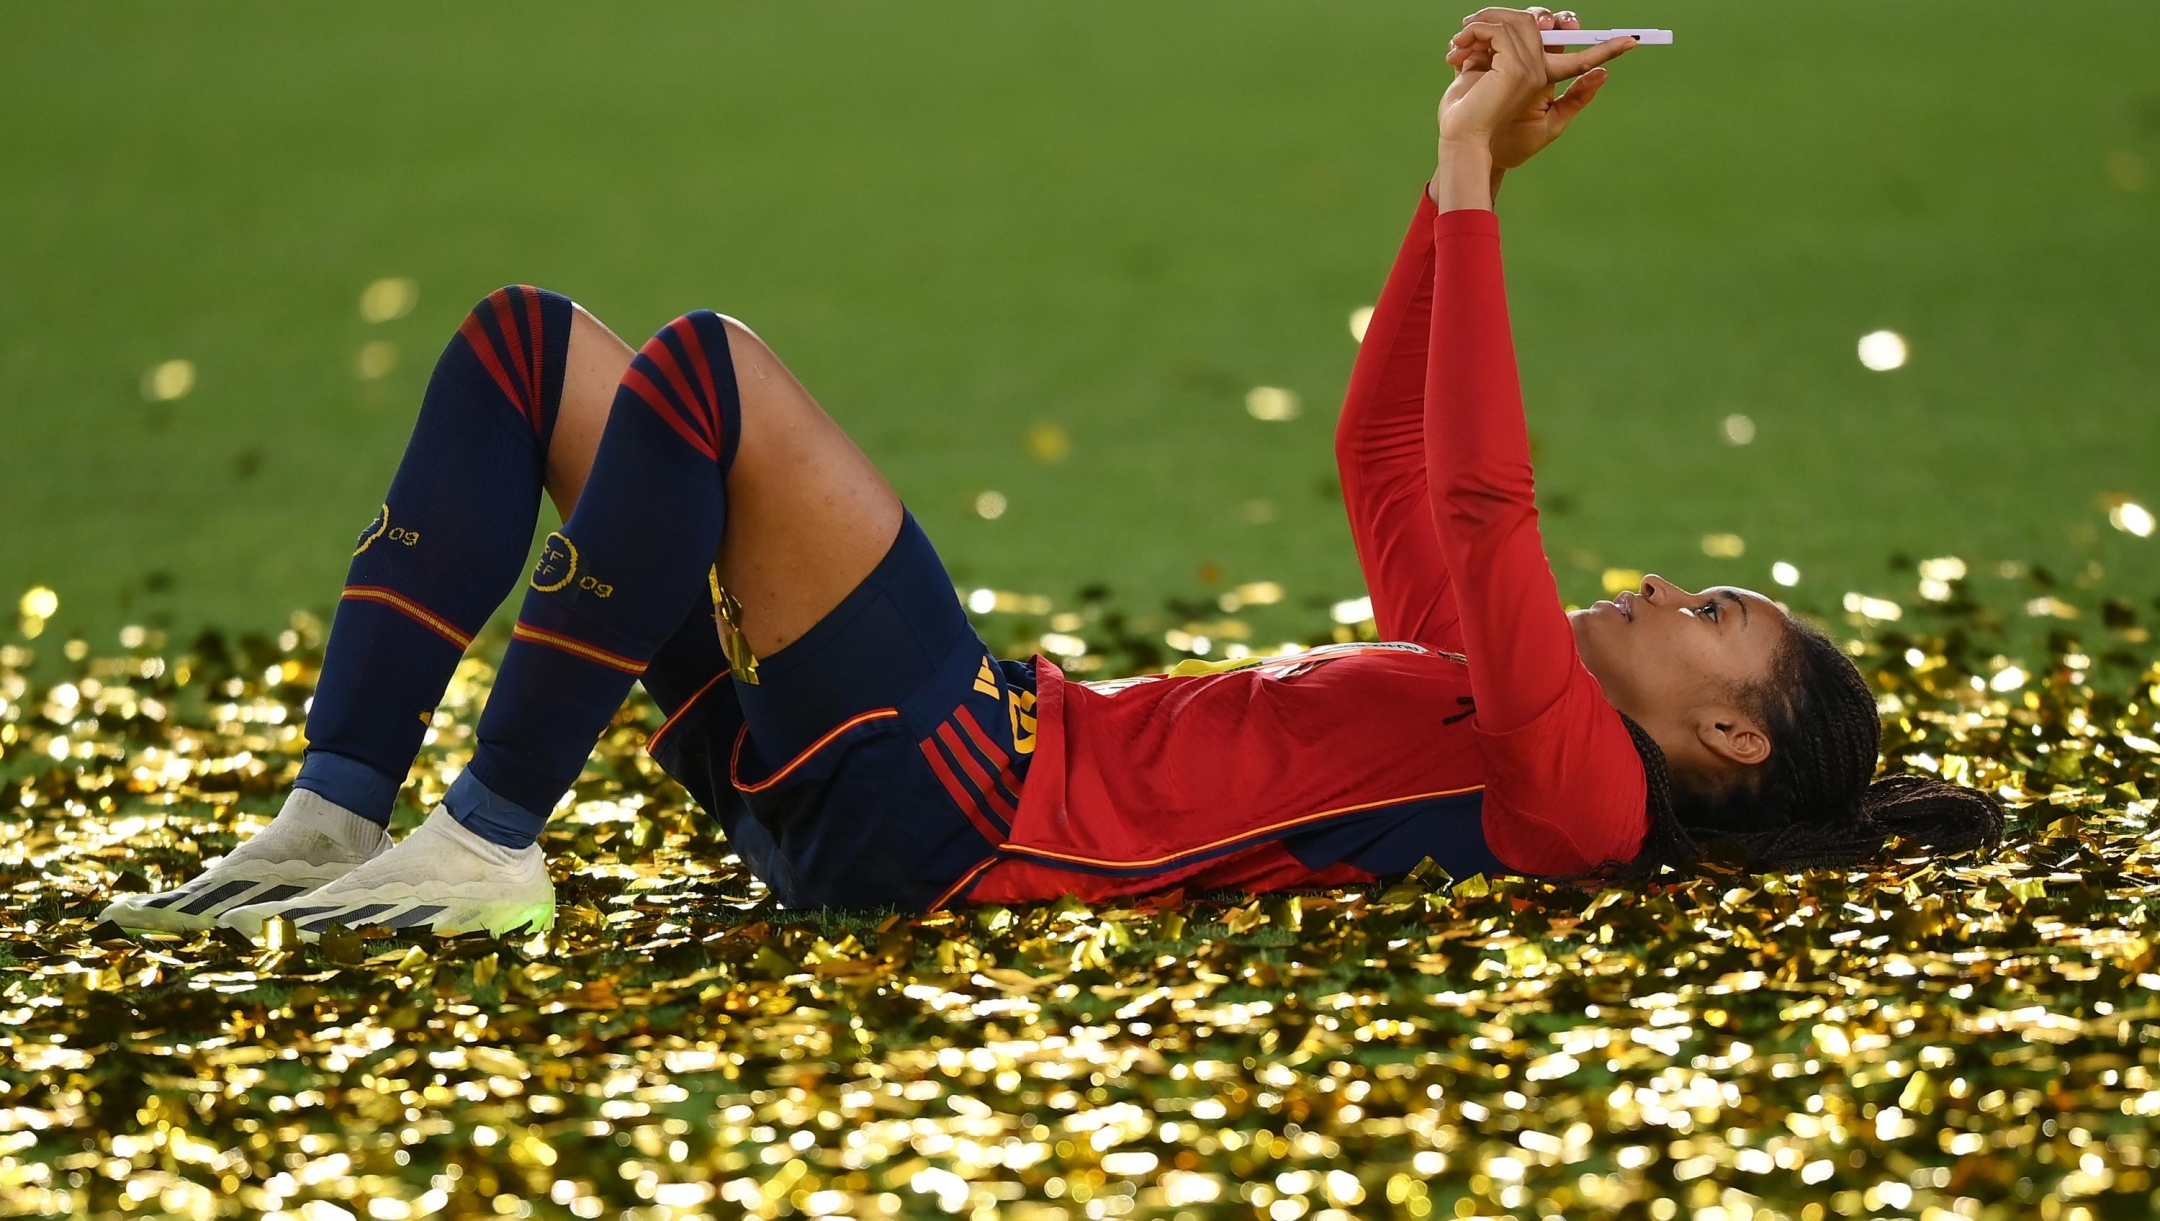 SYDNEY, AUSTRALIA - AUGUST 20: Salma Paralluelo of Spain celebrates after the team's victory in the FIFA Women's World Cup Australia & New Zealand 2023 Final match between Spain and England at Stadium Australia on August 20, 2023 in Sydney, Australia. (Photo by Justin Setterfield/Getty Images)